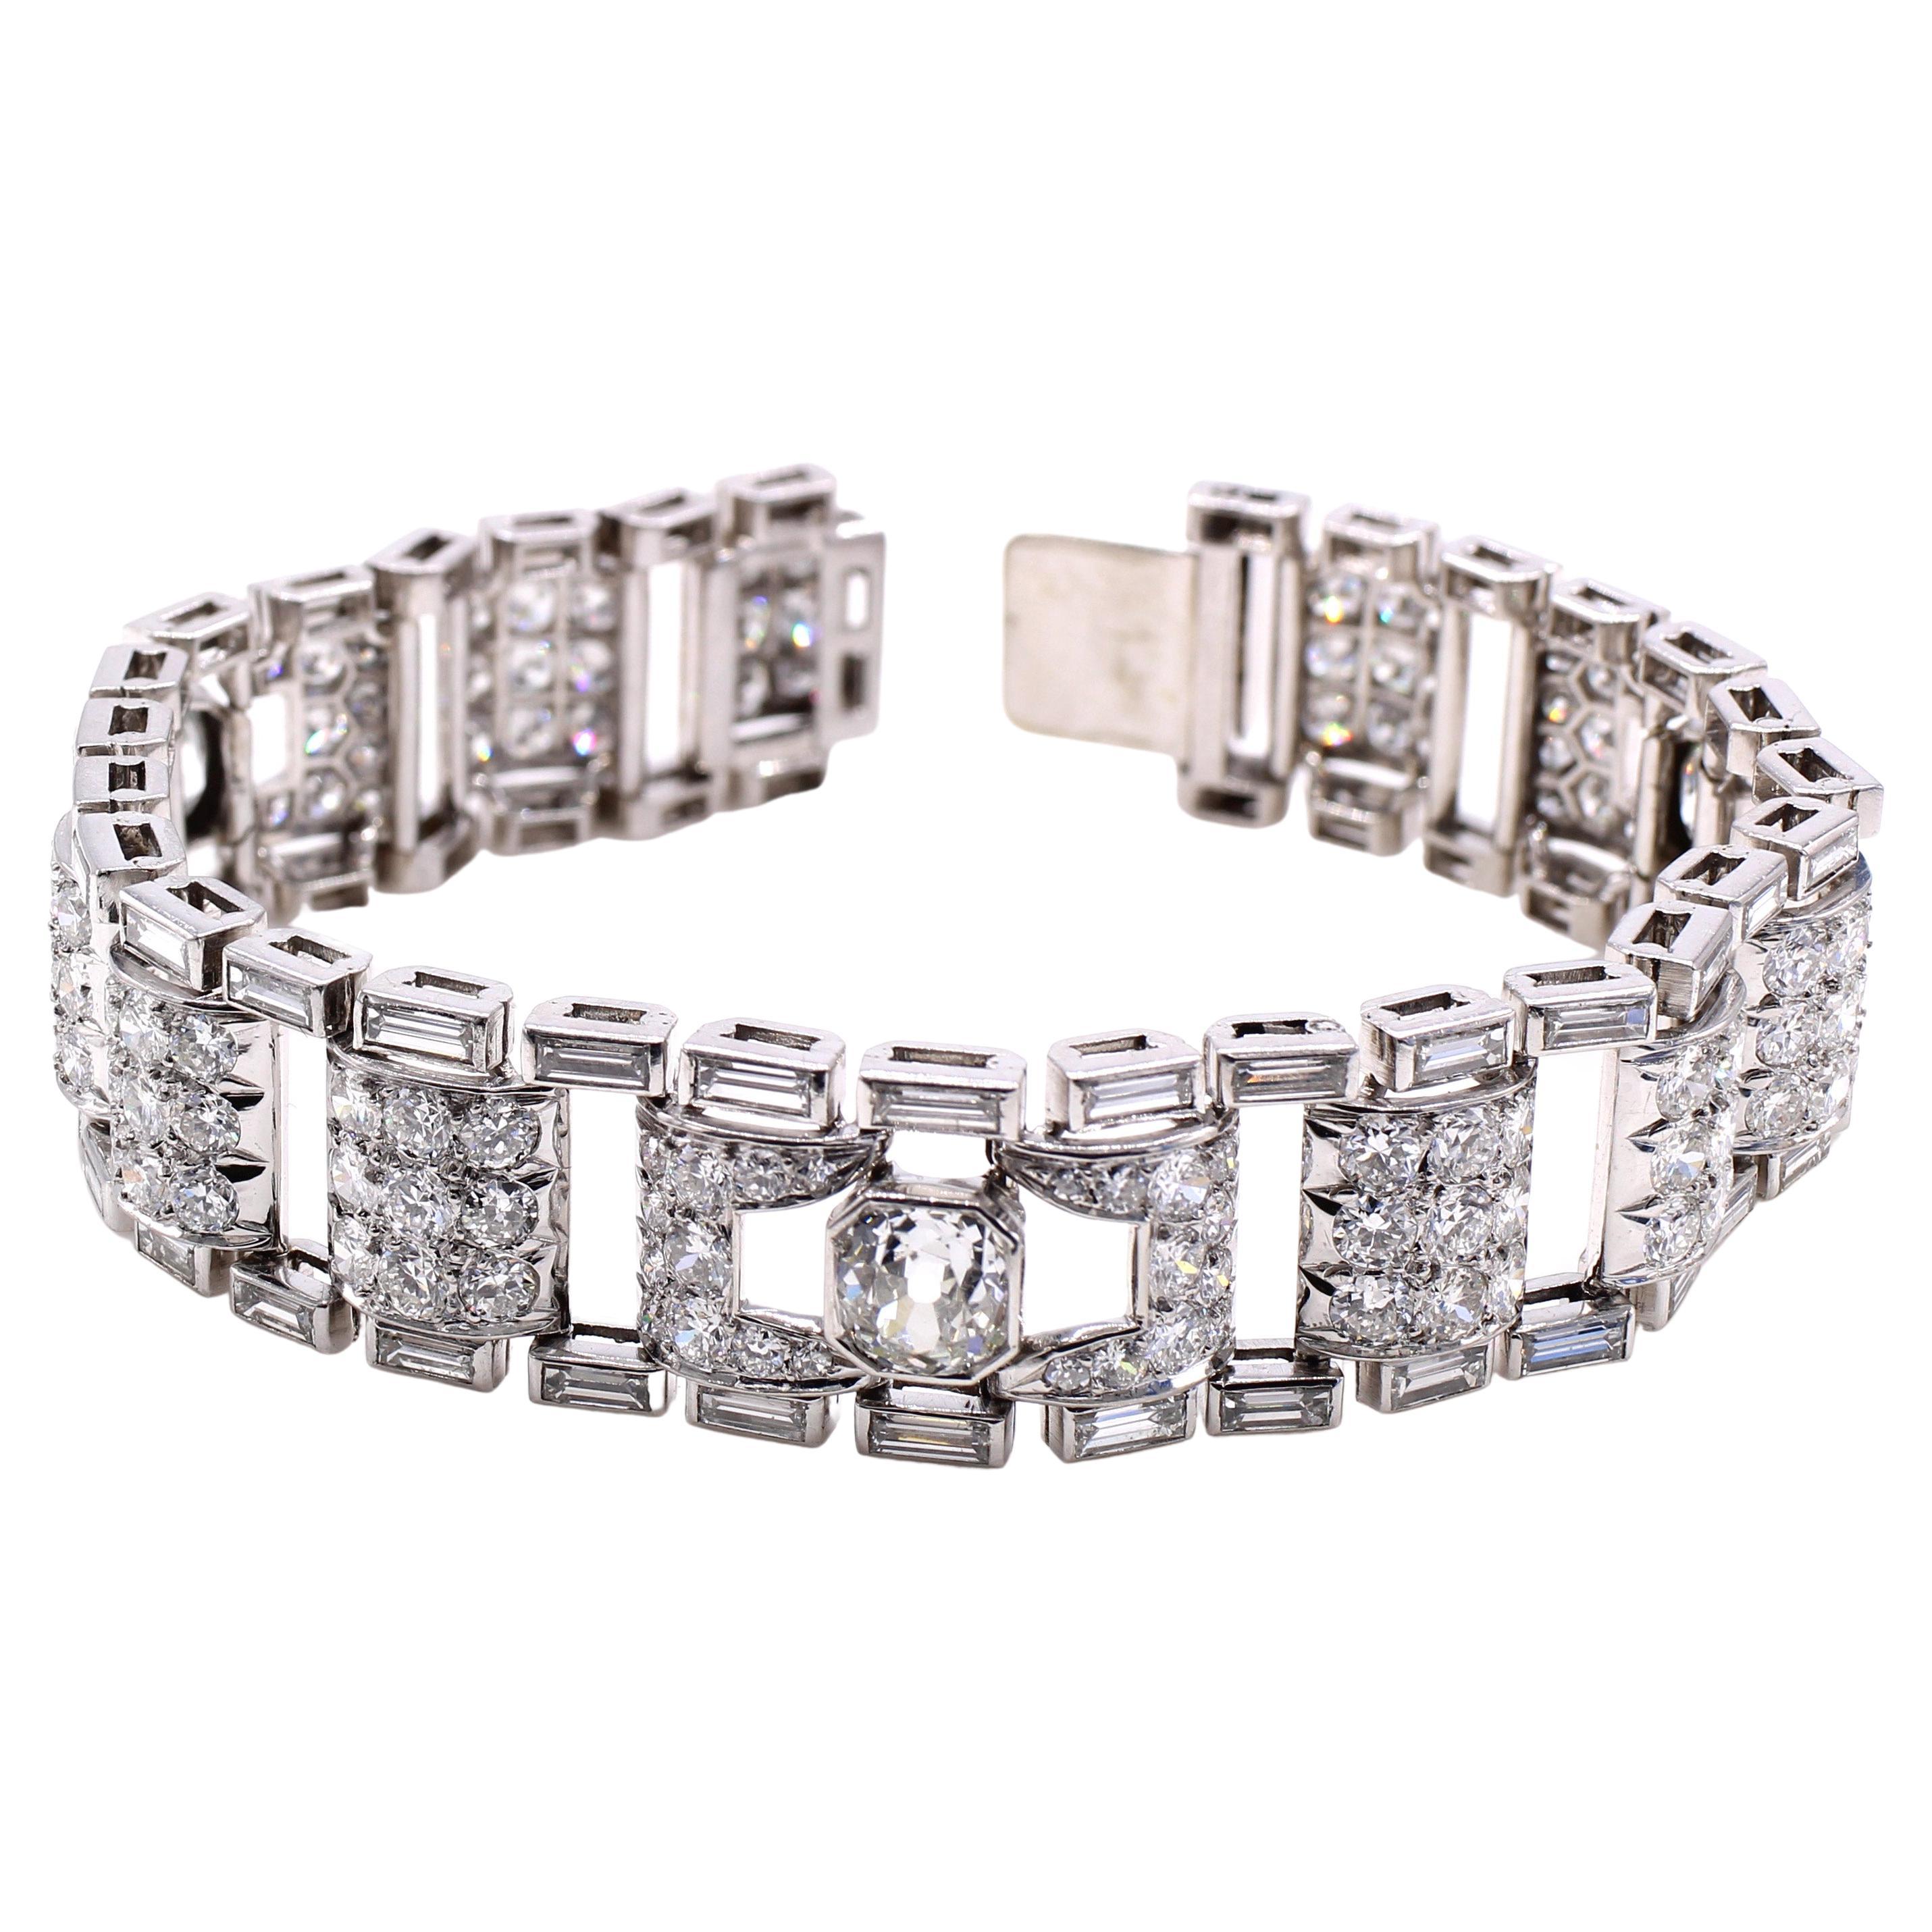 Superb Art Deco bracelet made in France ca. 1925. Beautifully designed and masterfully handcrafted in platinum, set with 3 Old European cut diamonds each weighing over 1 carat, in addition to 147 old cut diamonds and 60 baguette cut diamonds. The